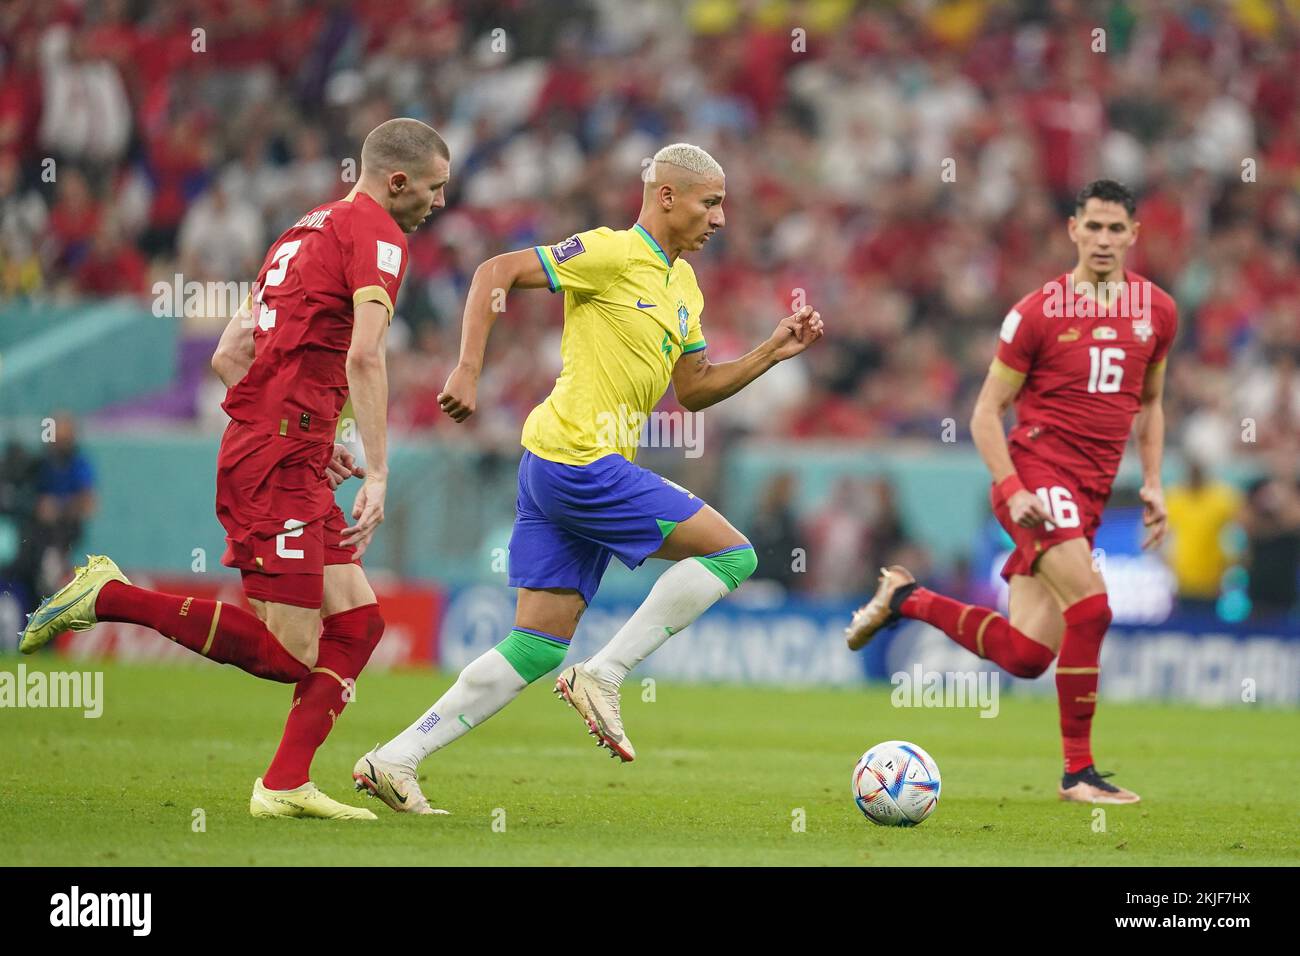 LUSAIL, QATAR - NOVEMBER 24: Player of Brazil Richarlison runs ahead of player of Serbia Strahinja Pavlovic during the FIFA World Cup Qatar 2022 group G match between Brazil and Serbia at Lusail Stadium on November 24, 2022 in Lusail, Qatar. (Photo by Florencia Tan Jun/PxImages) Credit: Px Images/Alamy Live News Stock Photo